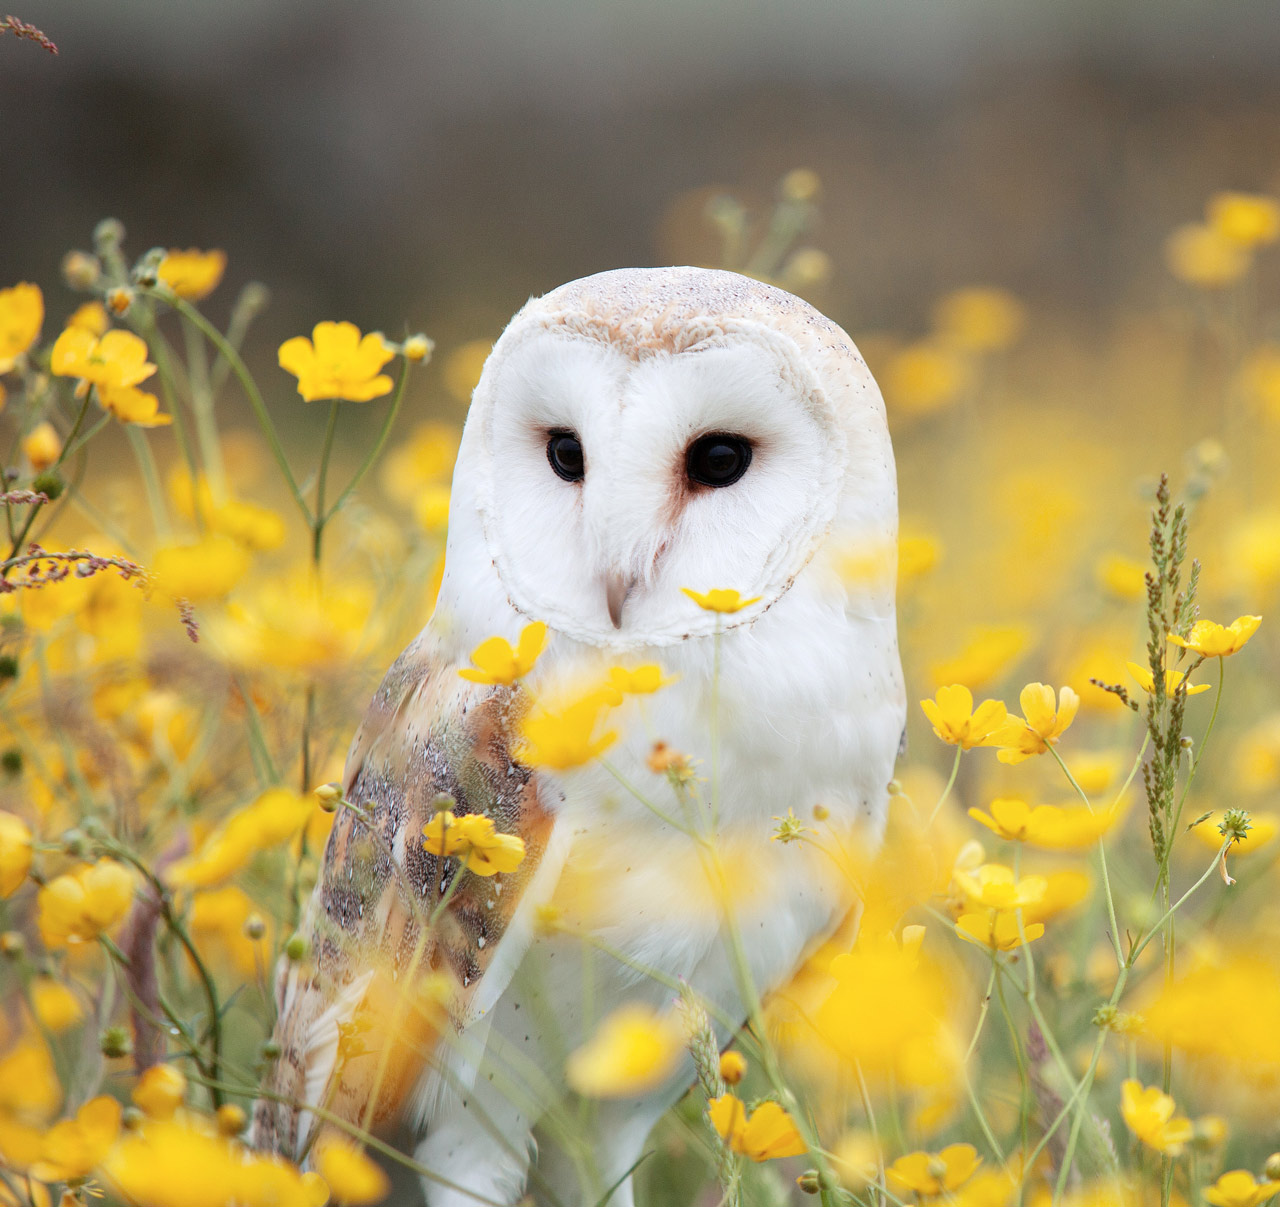 Brown and white barn owl in a field of wildflowers